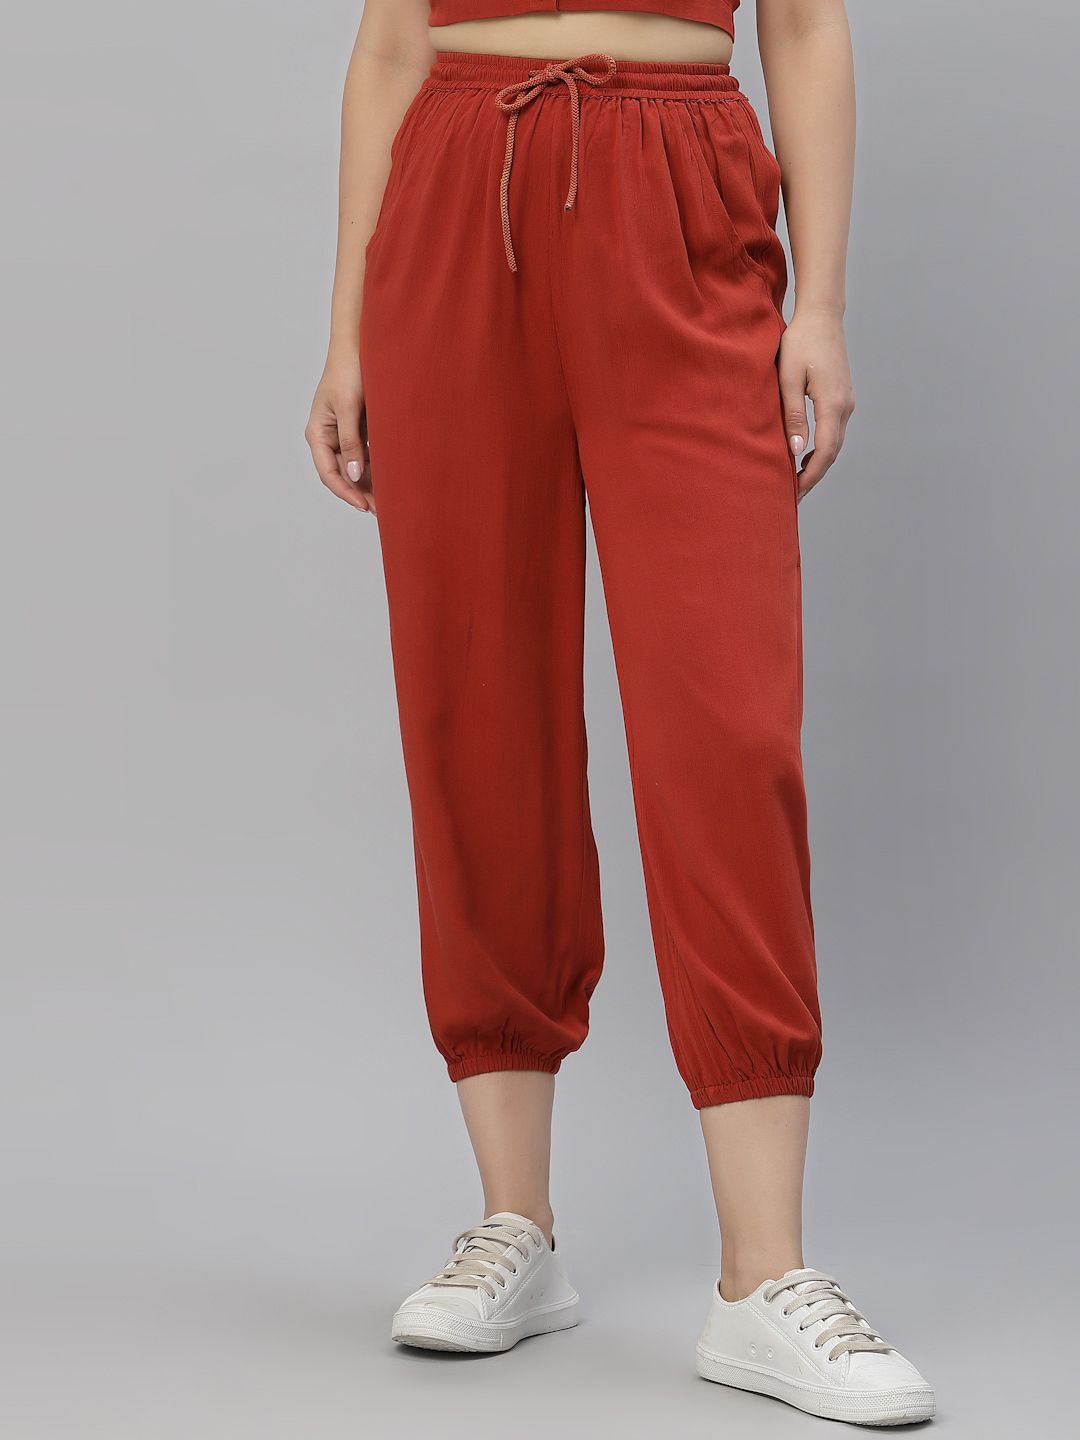 KASSUALLY Women Rust Joggers Trousers Price in India